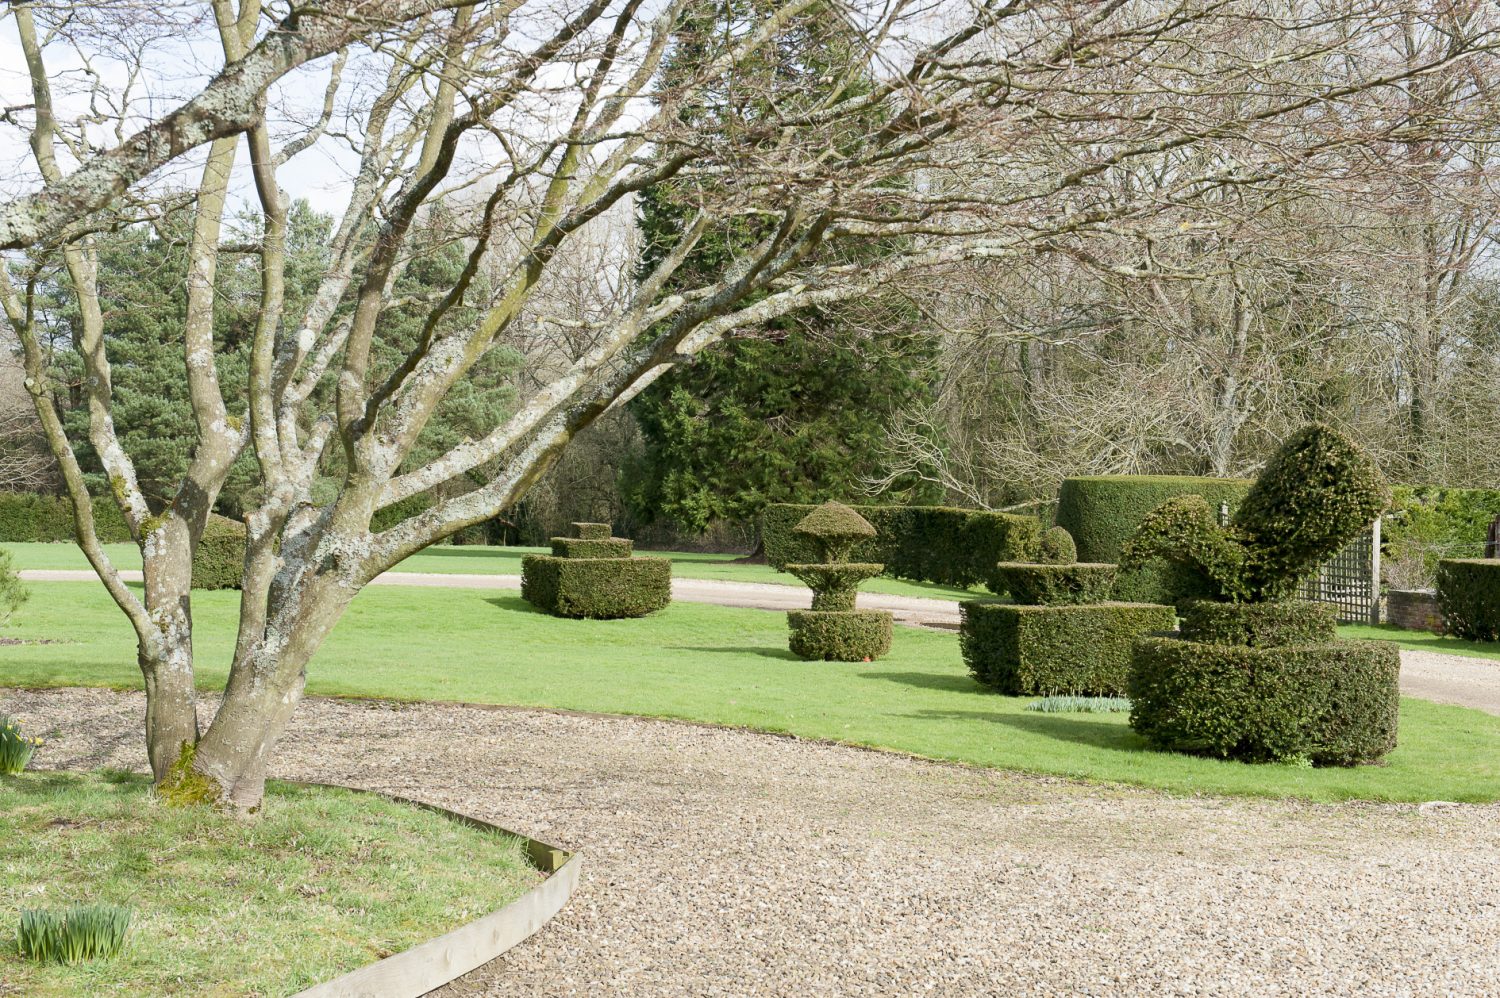 The garden is a dreamy combination of mature lawns, magnificent topiary and intimate spaces divided by box hedging and moss-covered walls